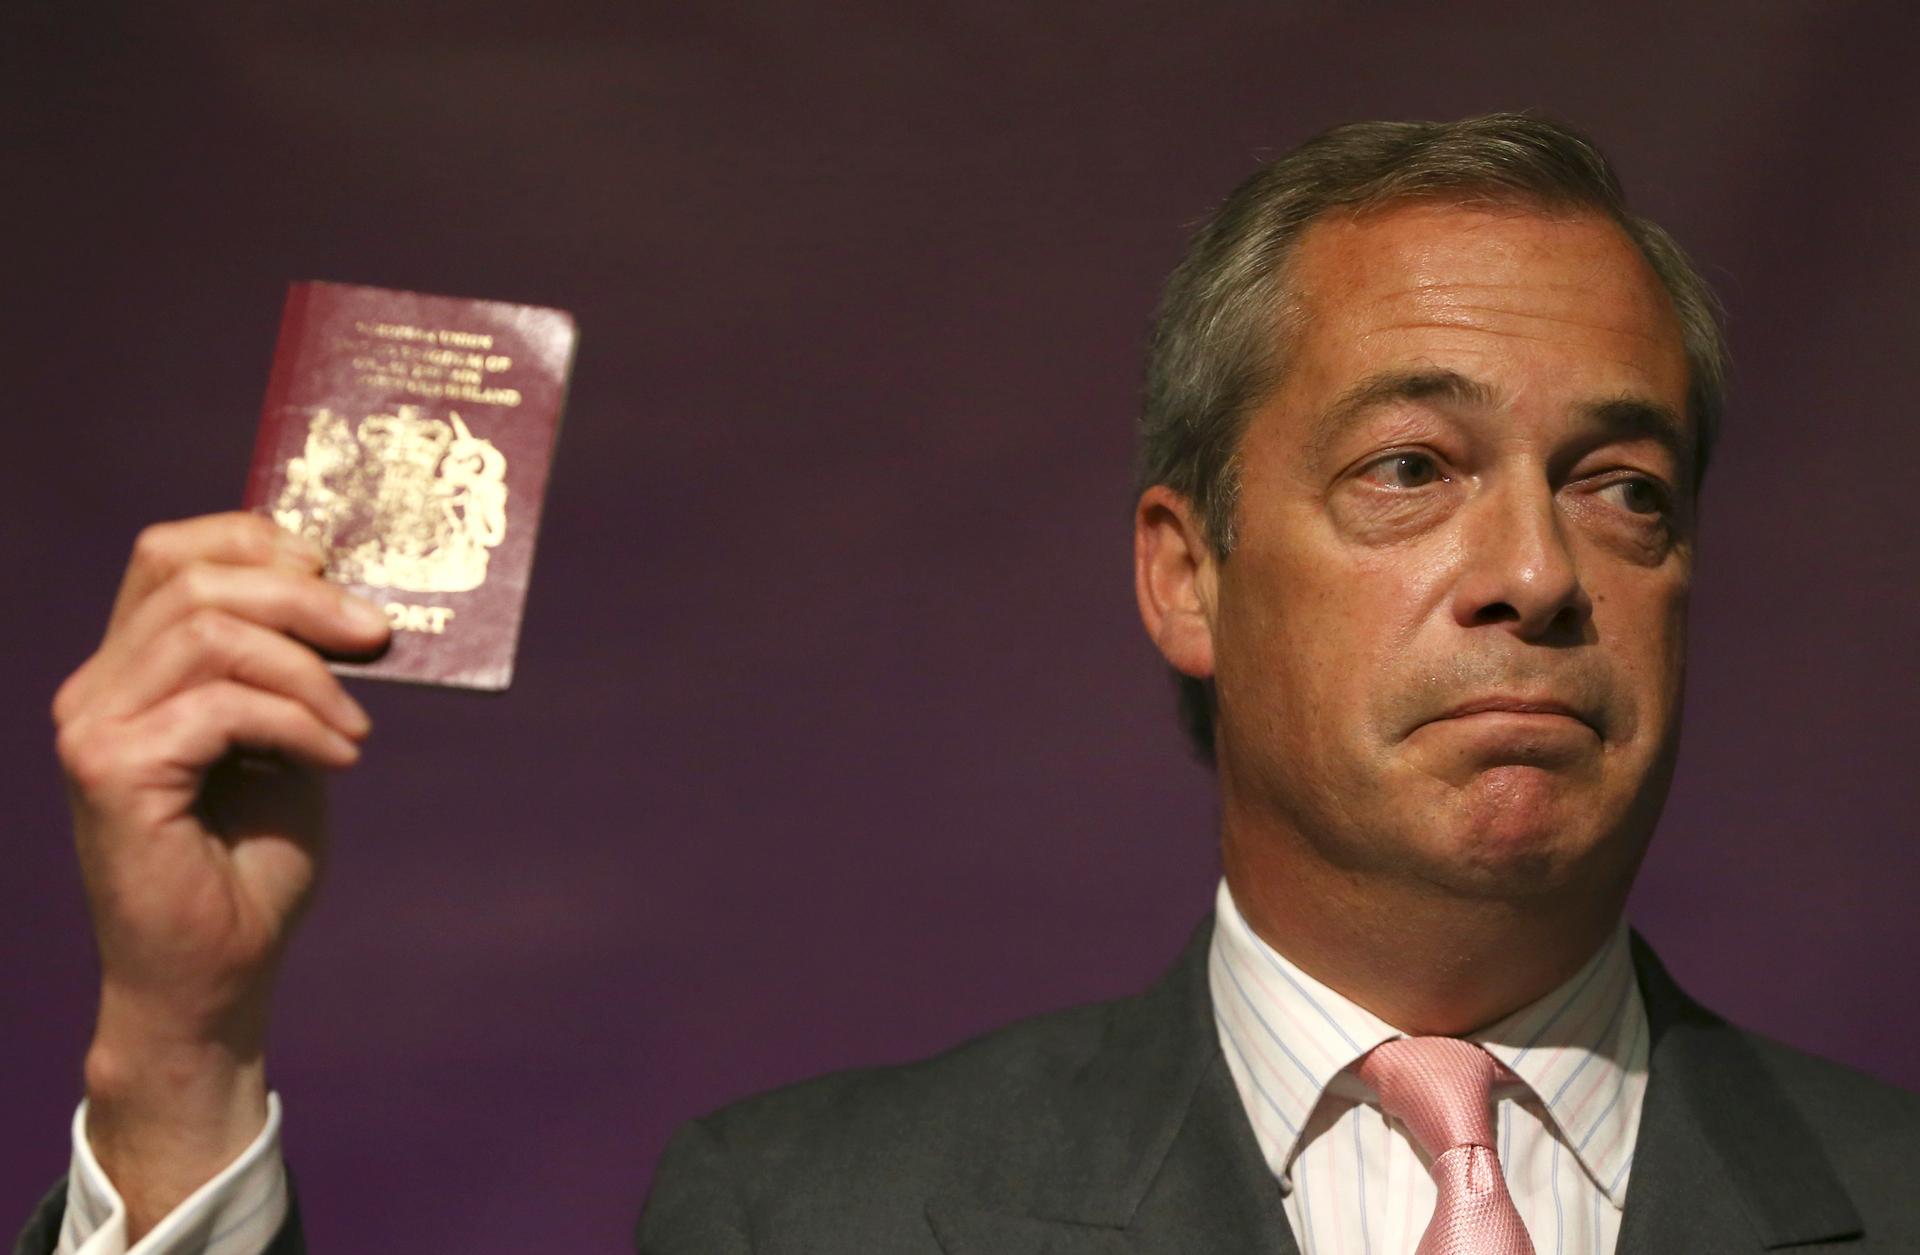 Leader of the United Kingdom Independence Party (UKIP) Nigel Farage holds his passport as he speaks at pro Brexit event in London, Britain June 3, 2016. 